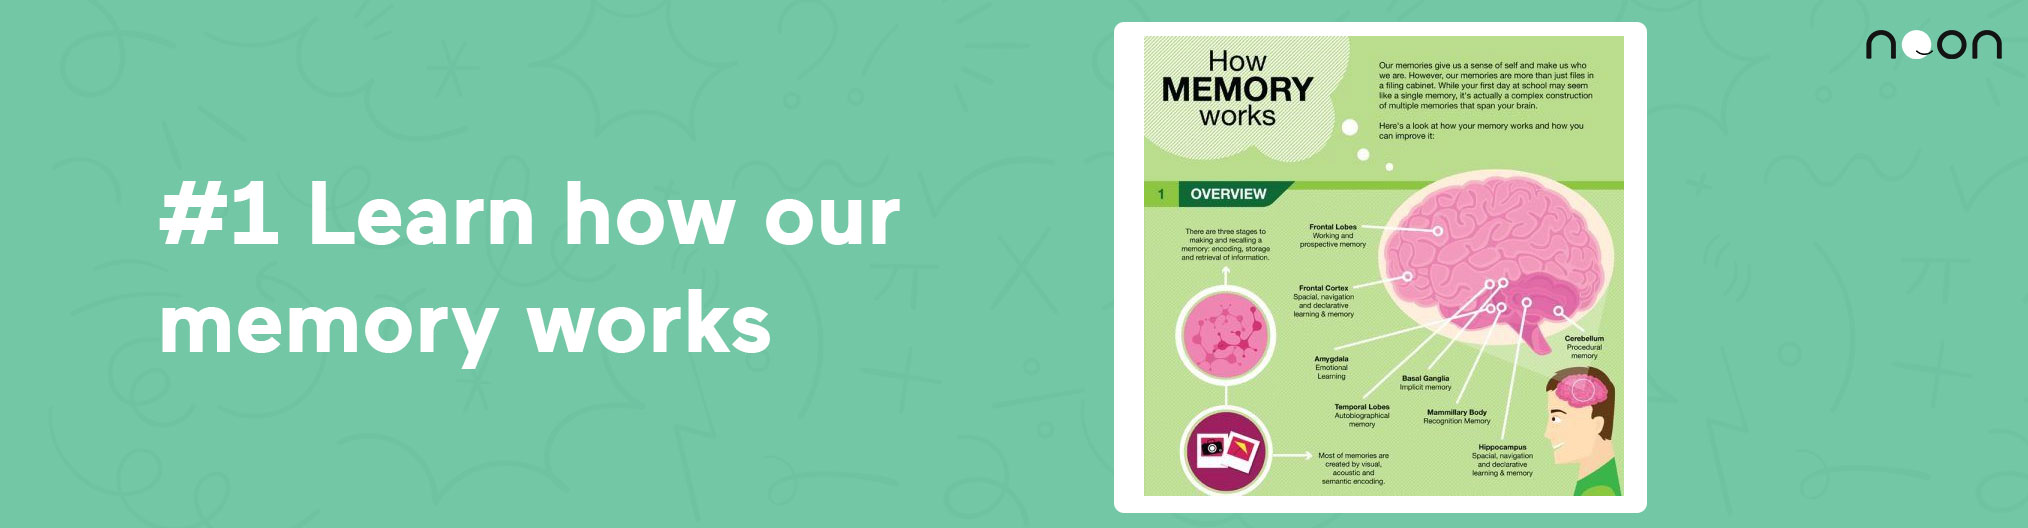 Learn how our memory works